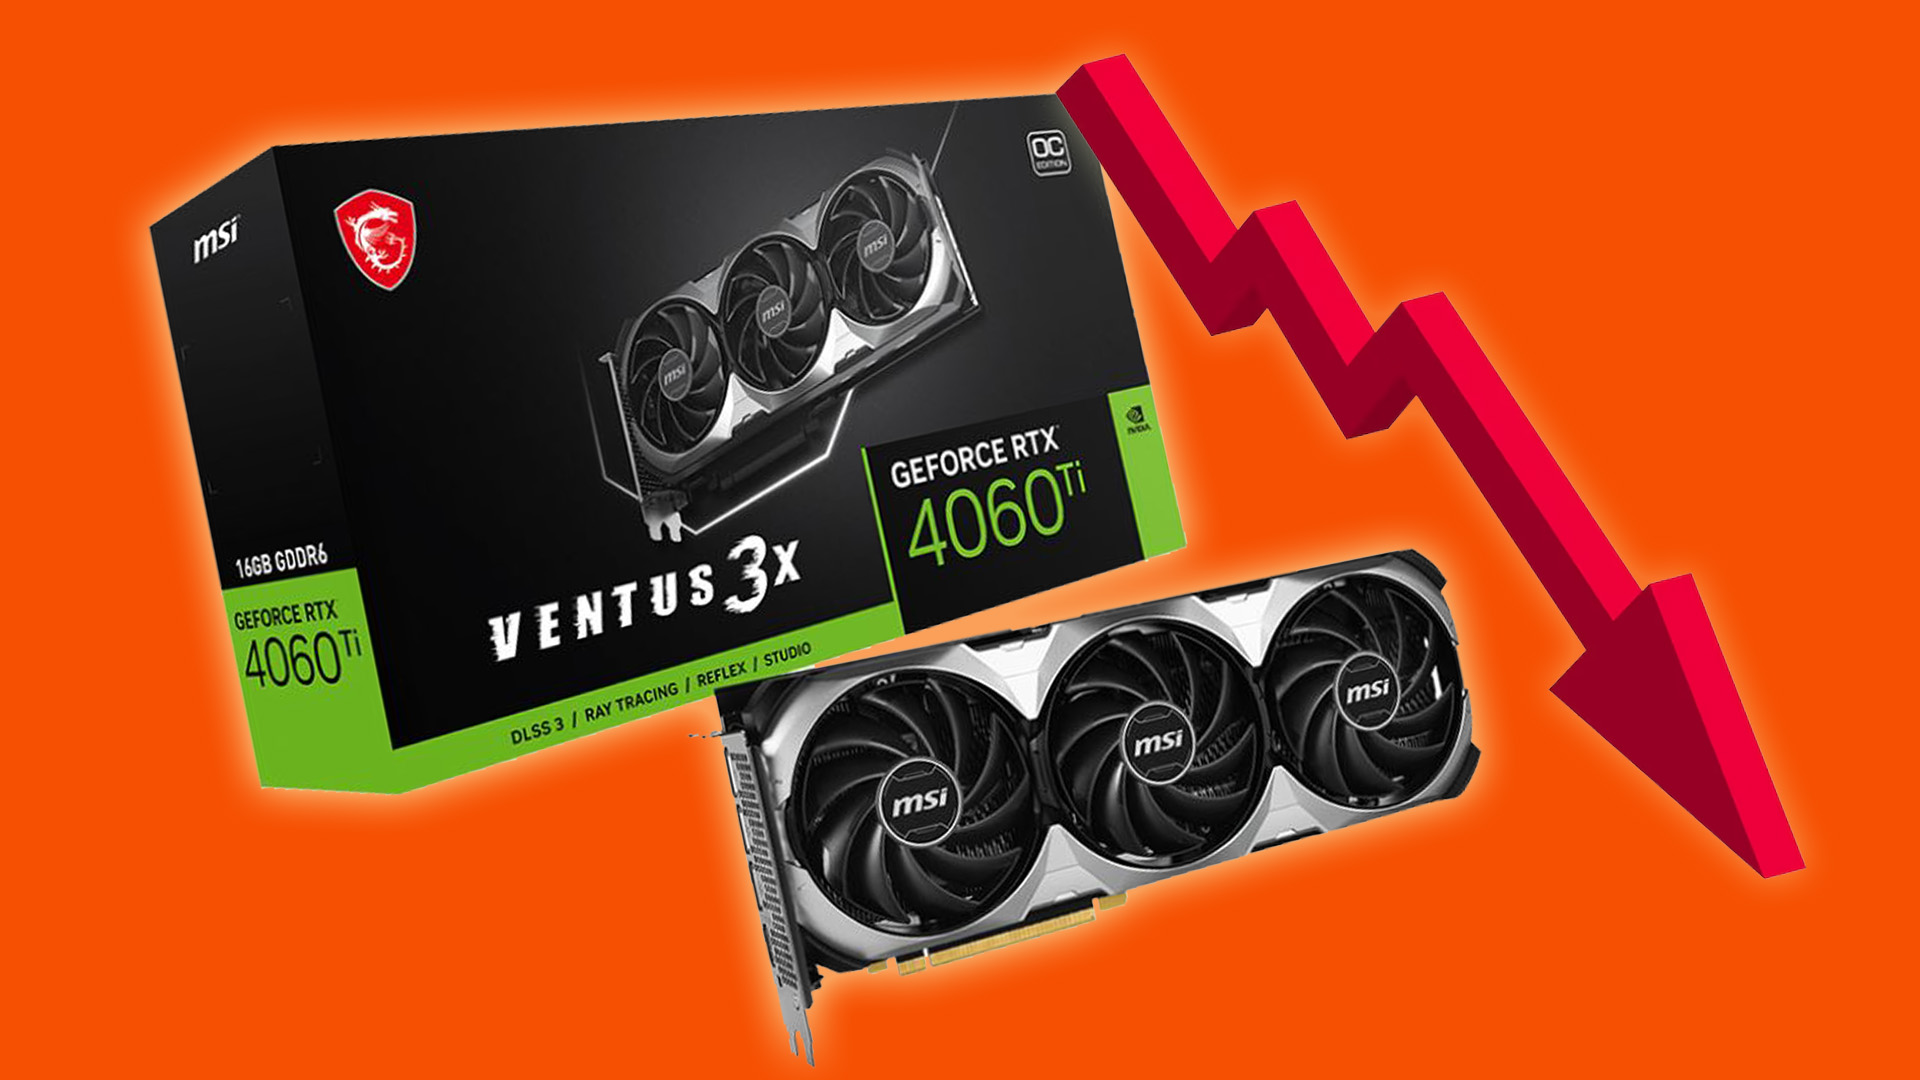 Nvidia GeForce RTX 4060 Ti 16GB prices are already falling